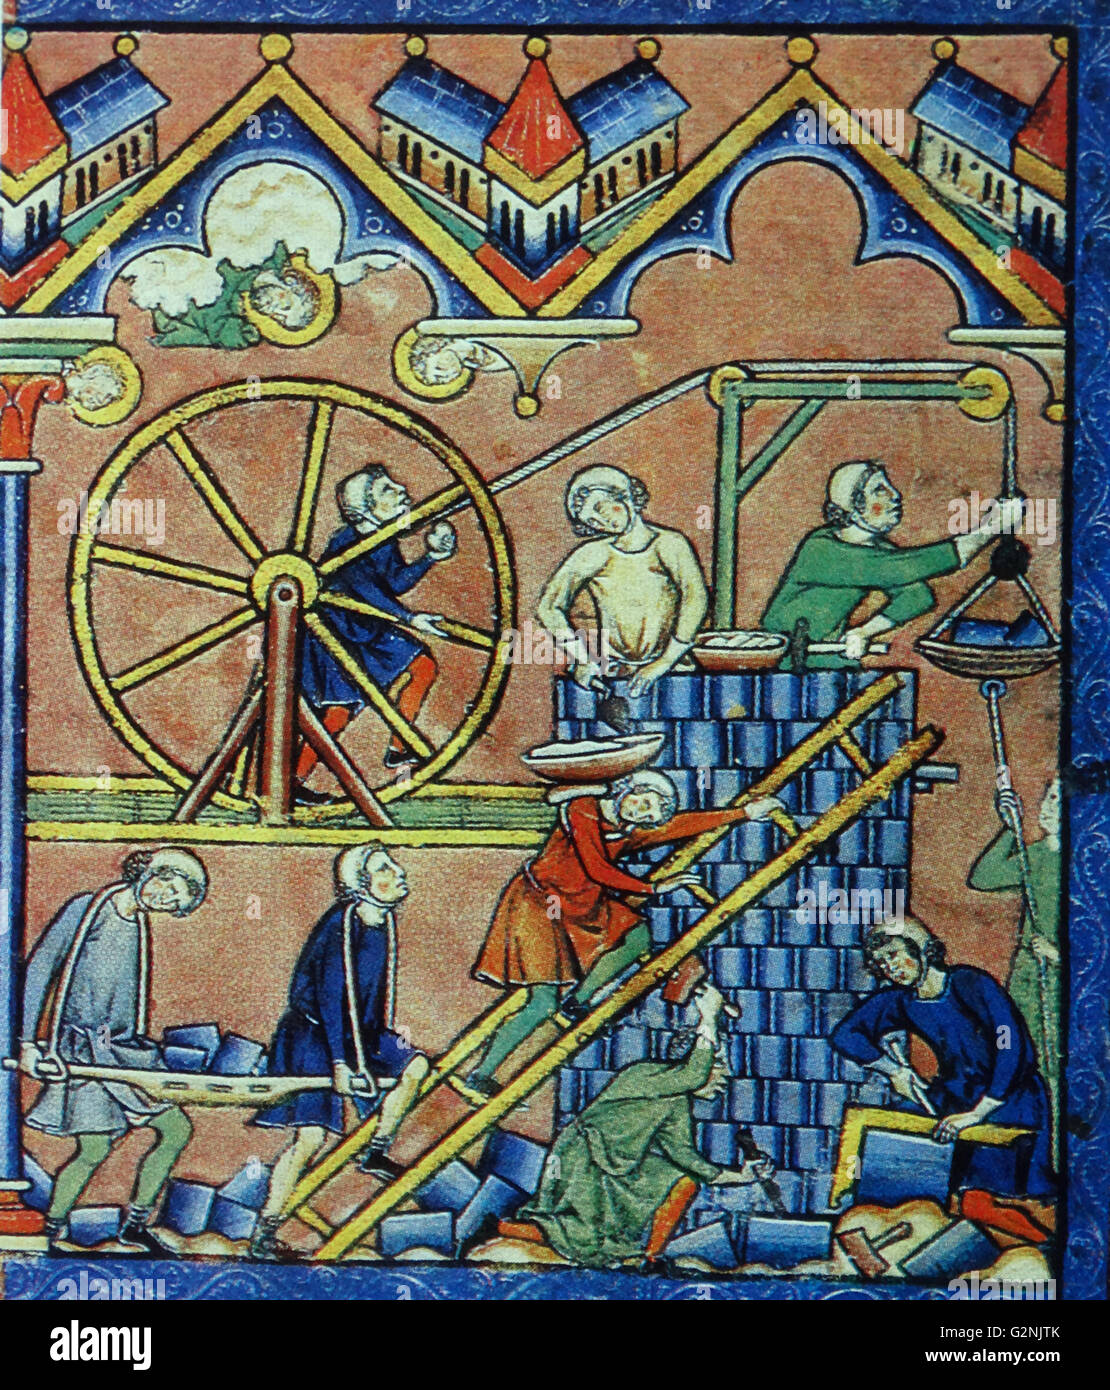 Miniature of a hosting system. A hosting system consisted of cranes attached to great wheels worked either like a capstan or like a treadmill. The miniature depicts the treadmill type, masons laying chequered masonry and a man carrying the motor up a ladder. Dated 13th Century Stock Photo